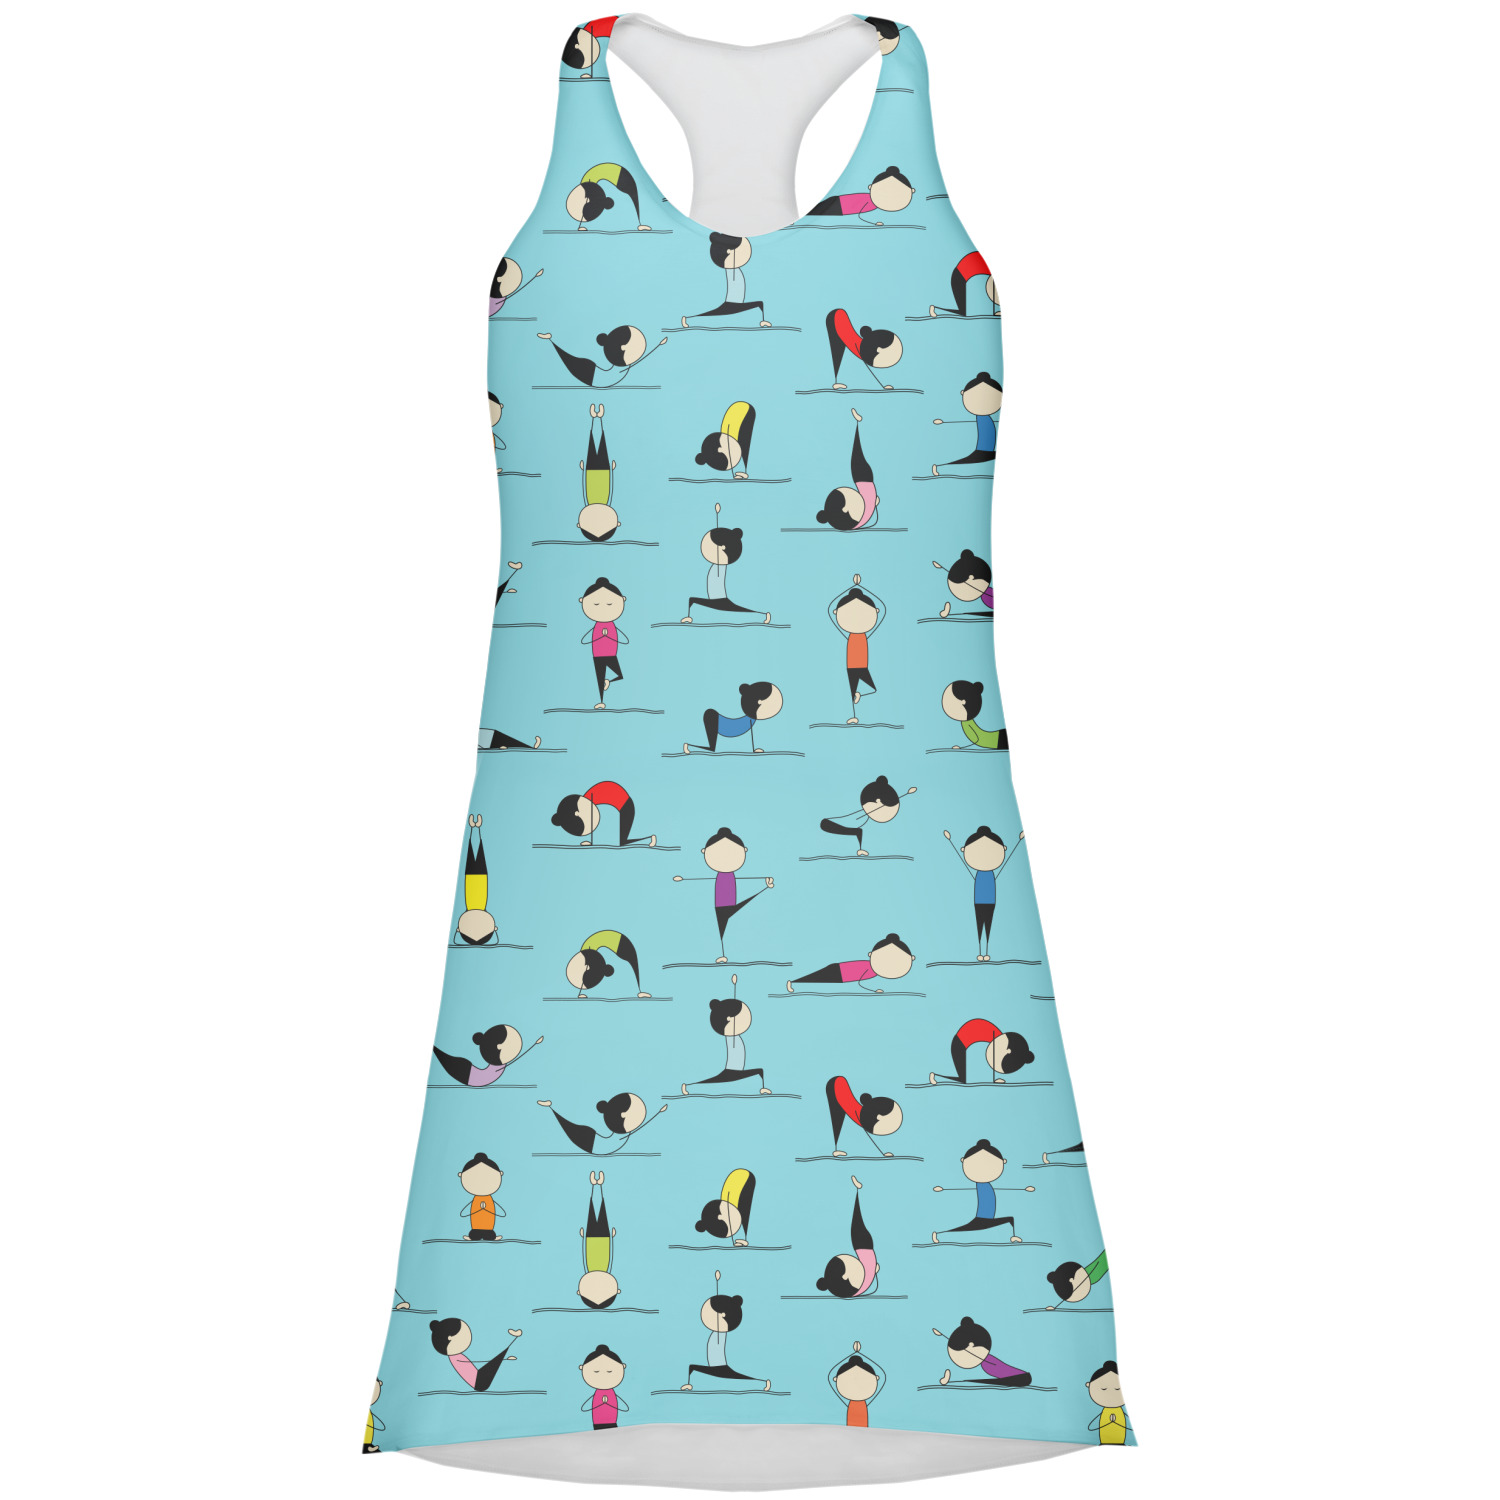 yoga poses in a dress